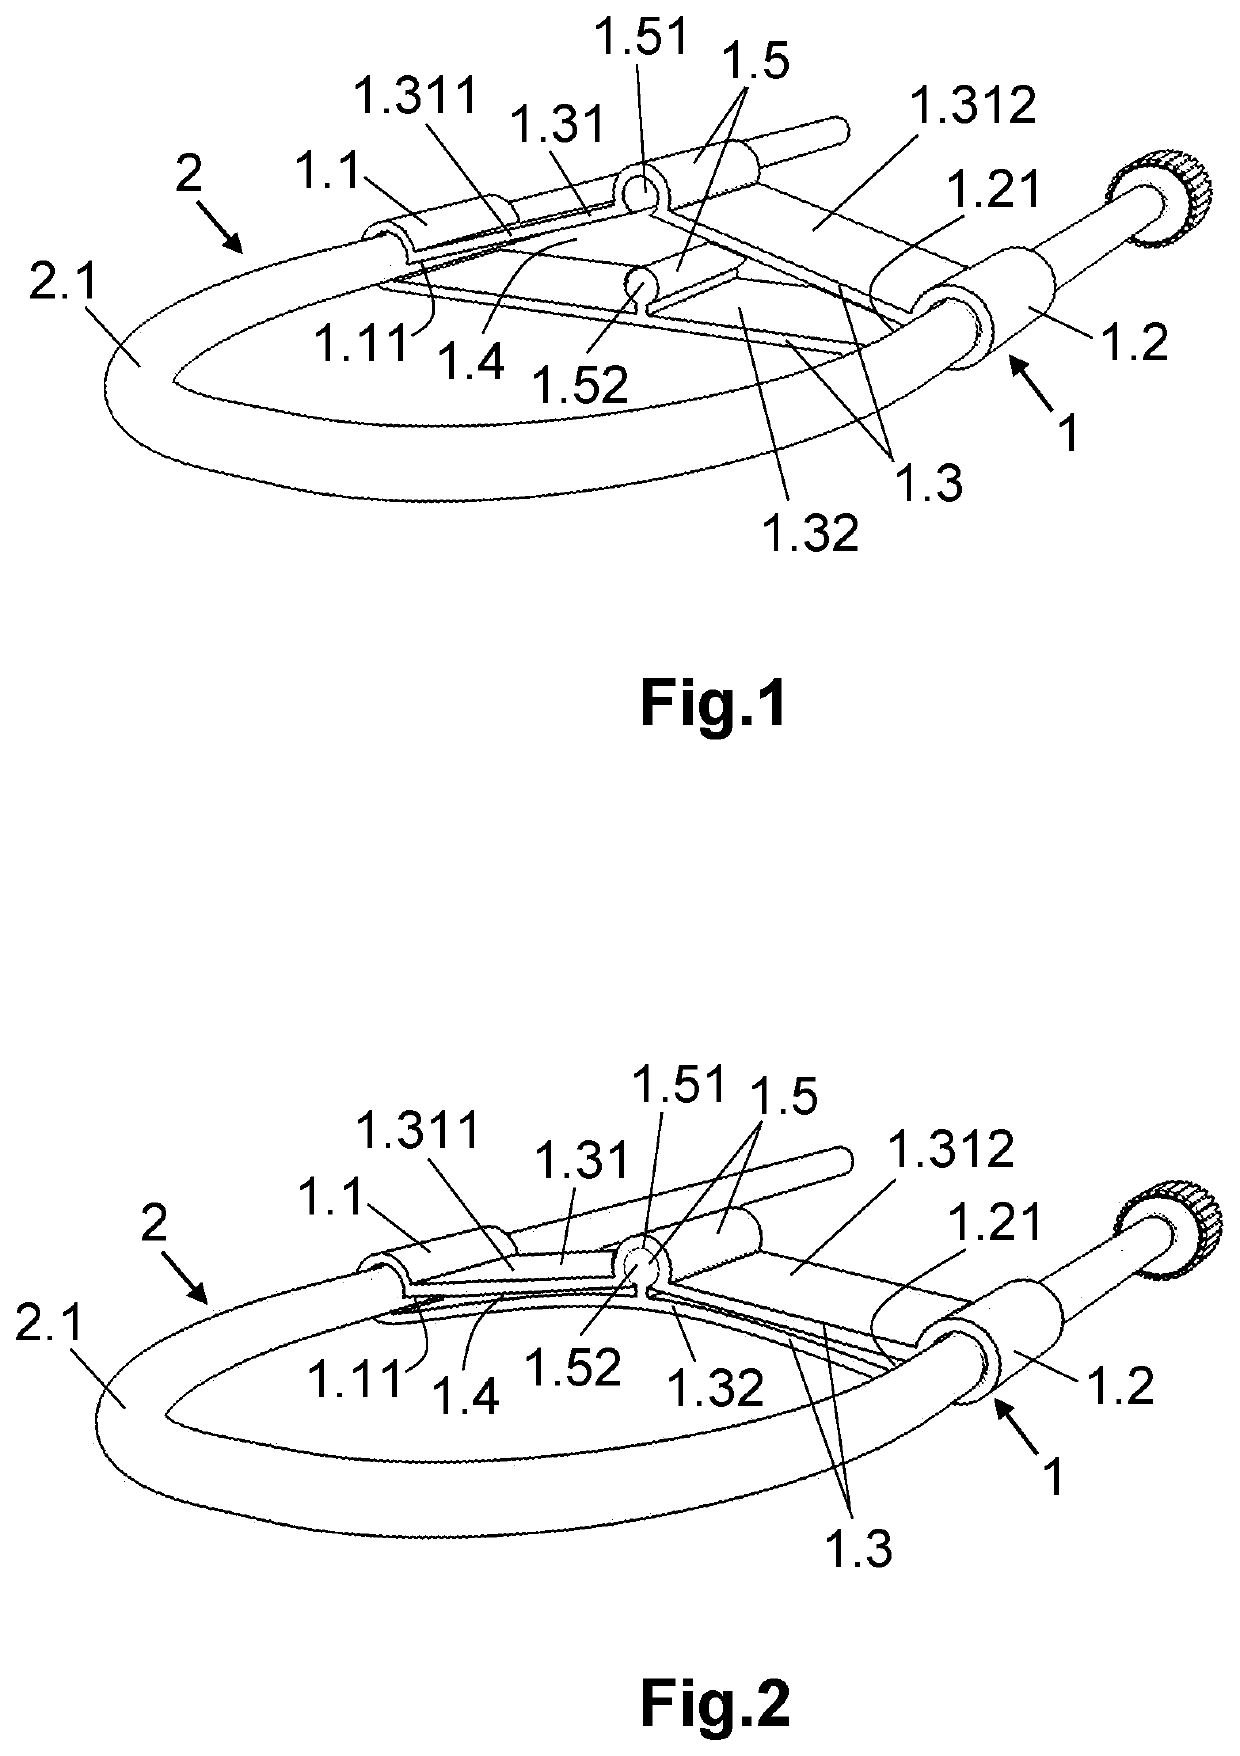 Device for securing a peripheral venous catheter